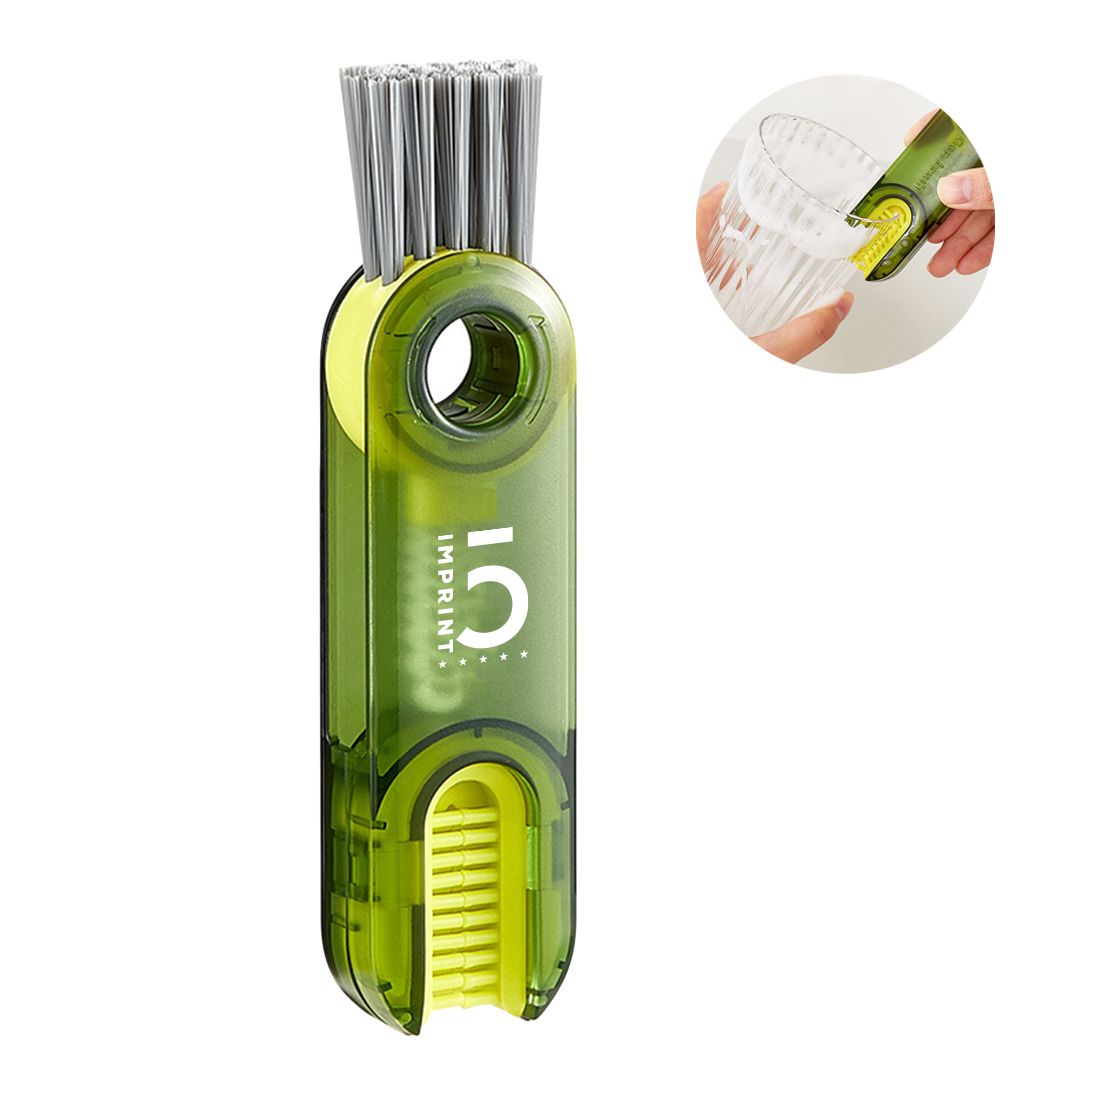 https://www.imprint5.com/media/mageworx/optionfeatures/product/option/value/c/u/custom_3-in-1_rotating_cleaning_brush_for_cup.jpg